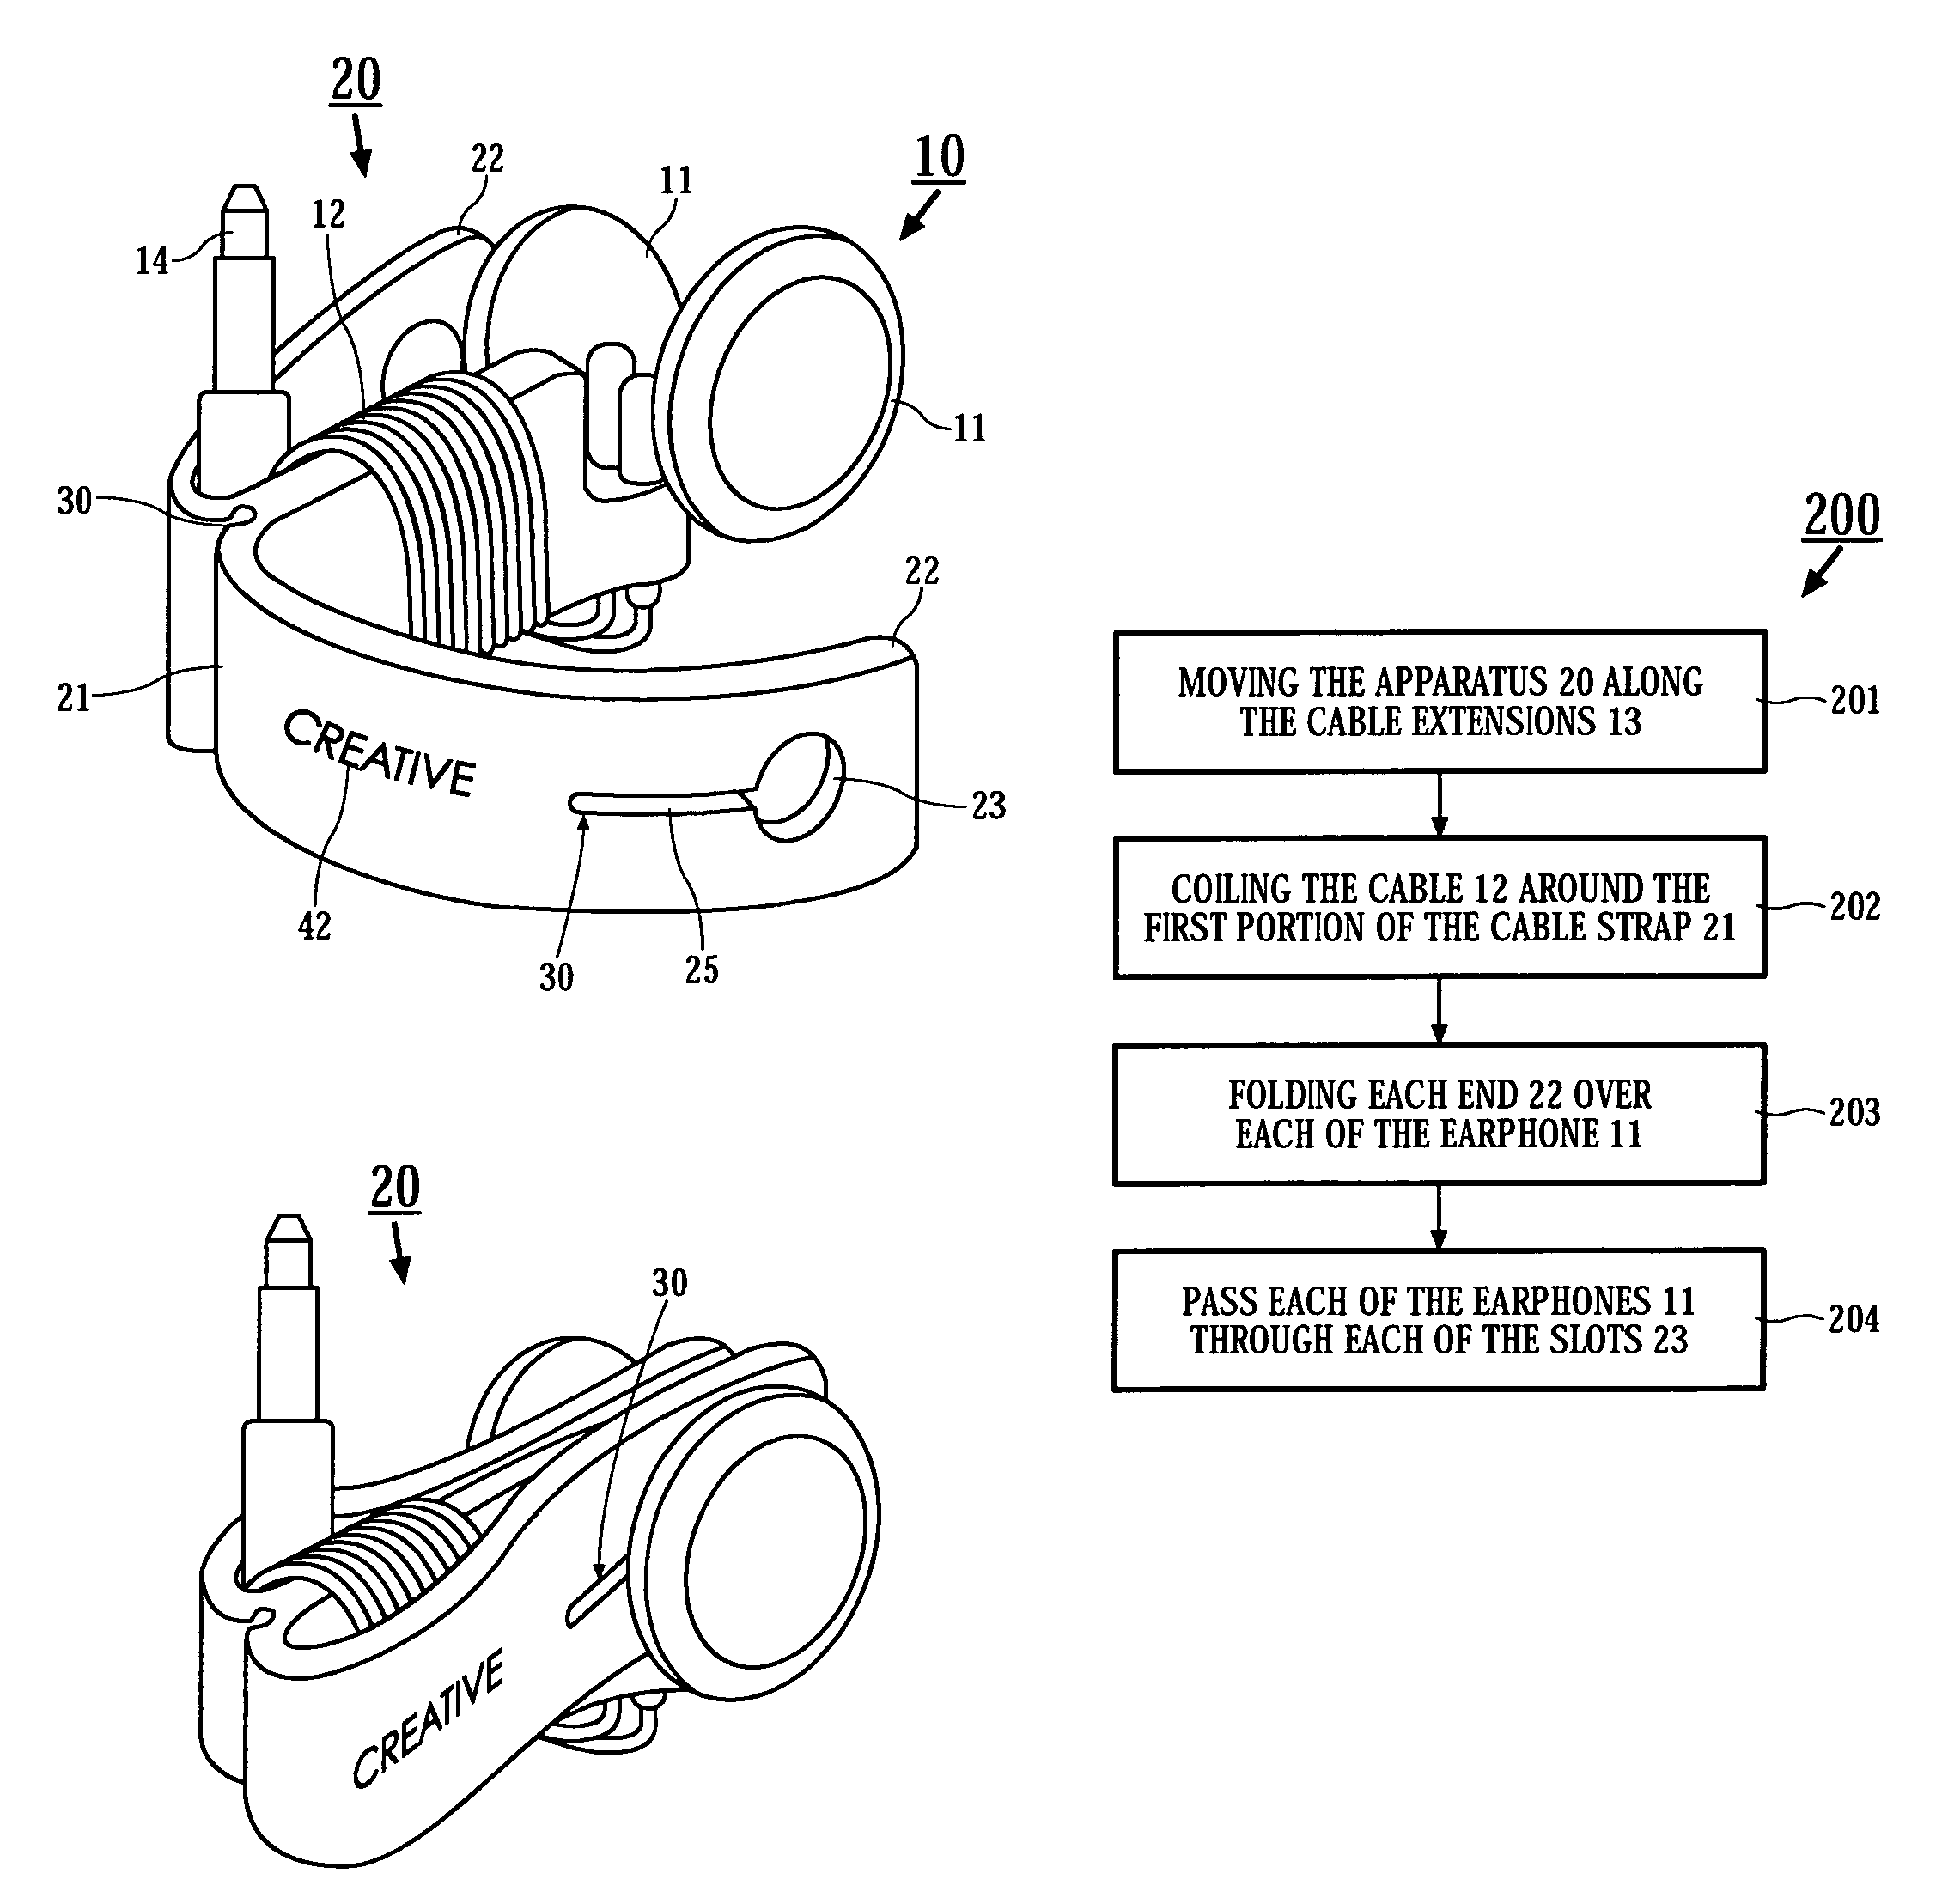 Cable coiling method and apparatus